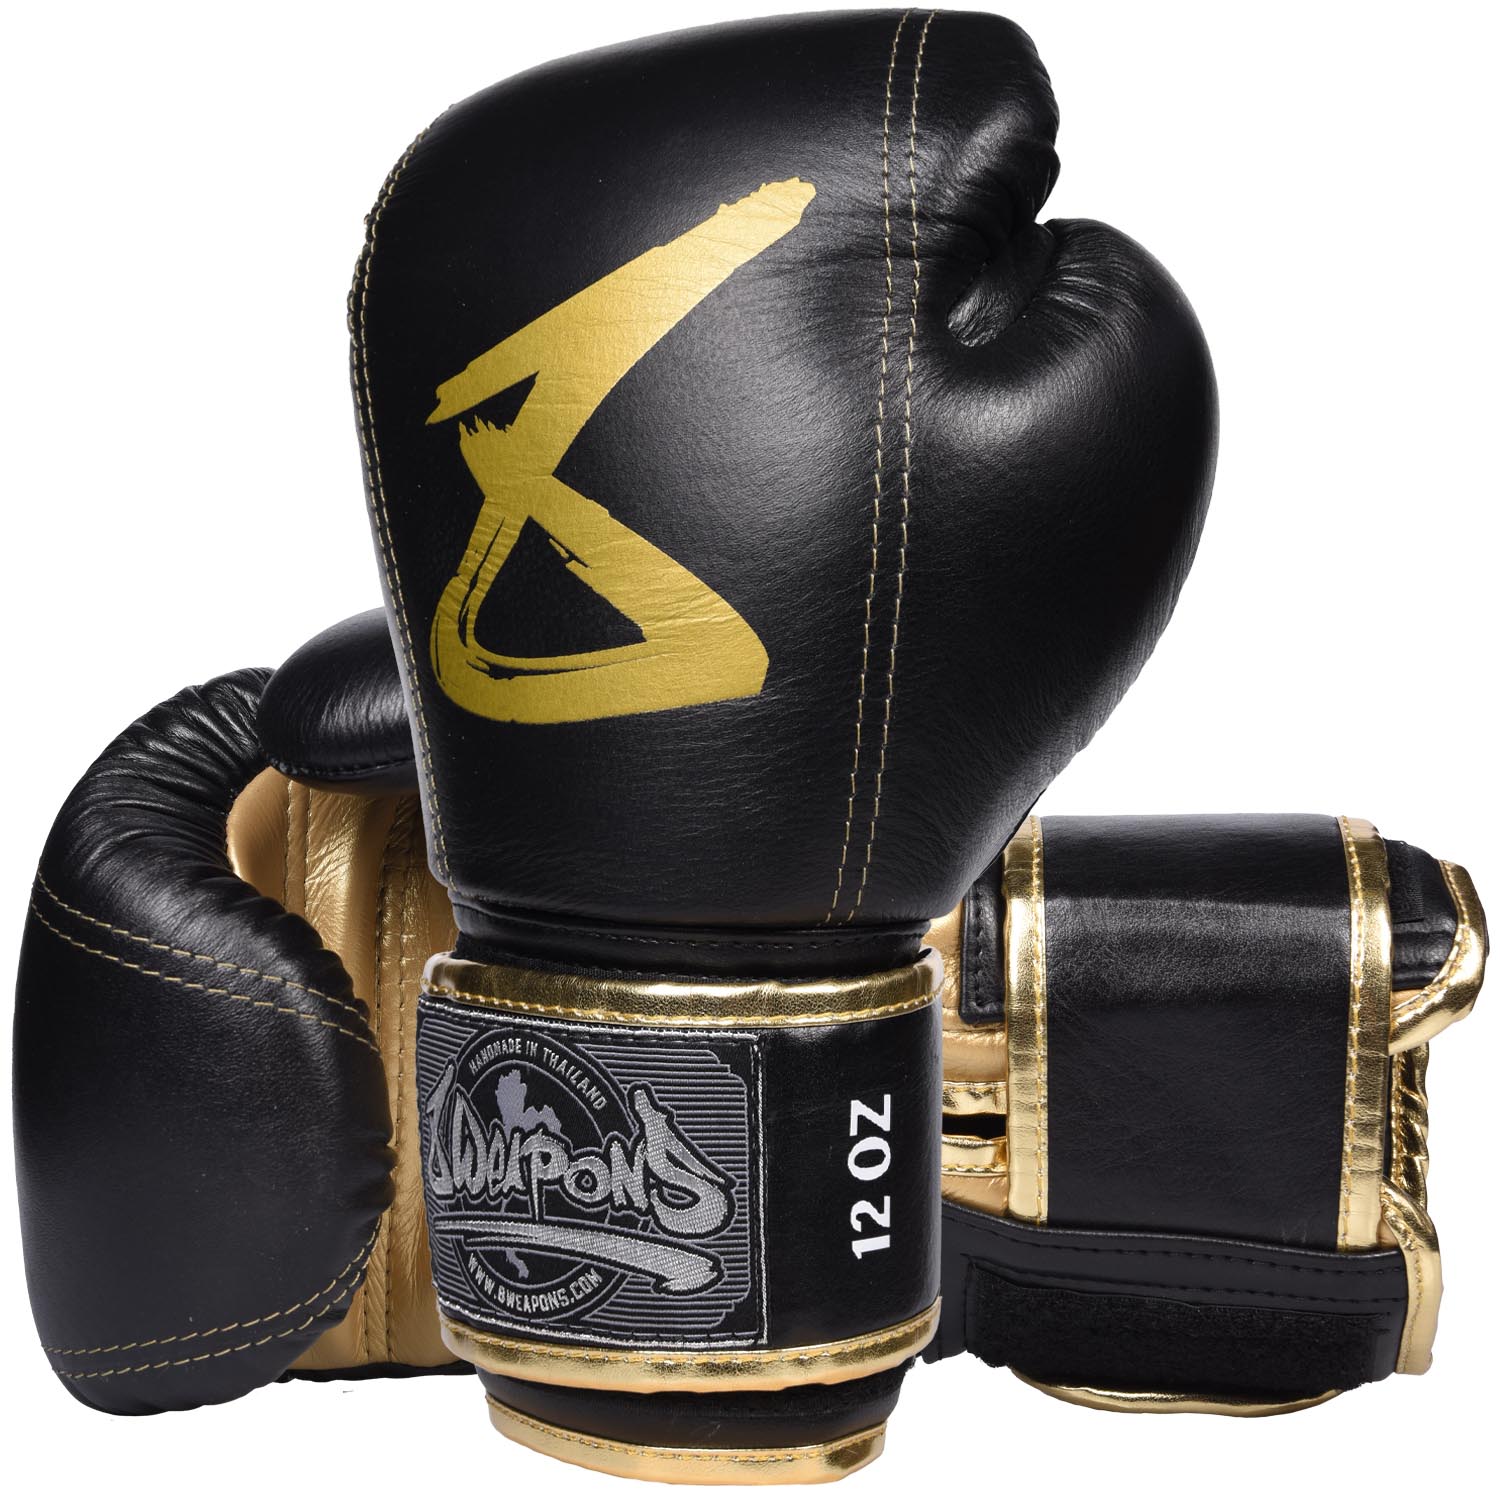 8 WEAPONS Boxing Gloves, Premium Leather, black-gold, 16 Oz